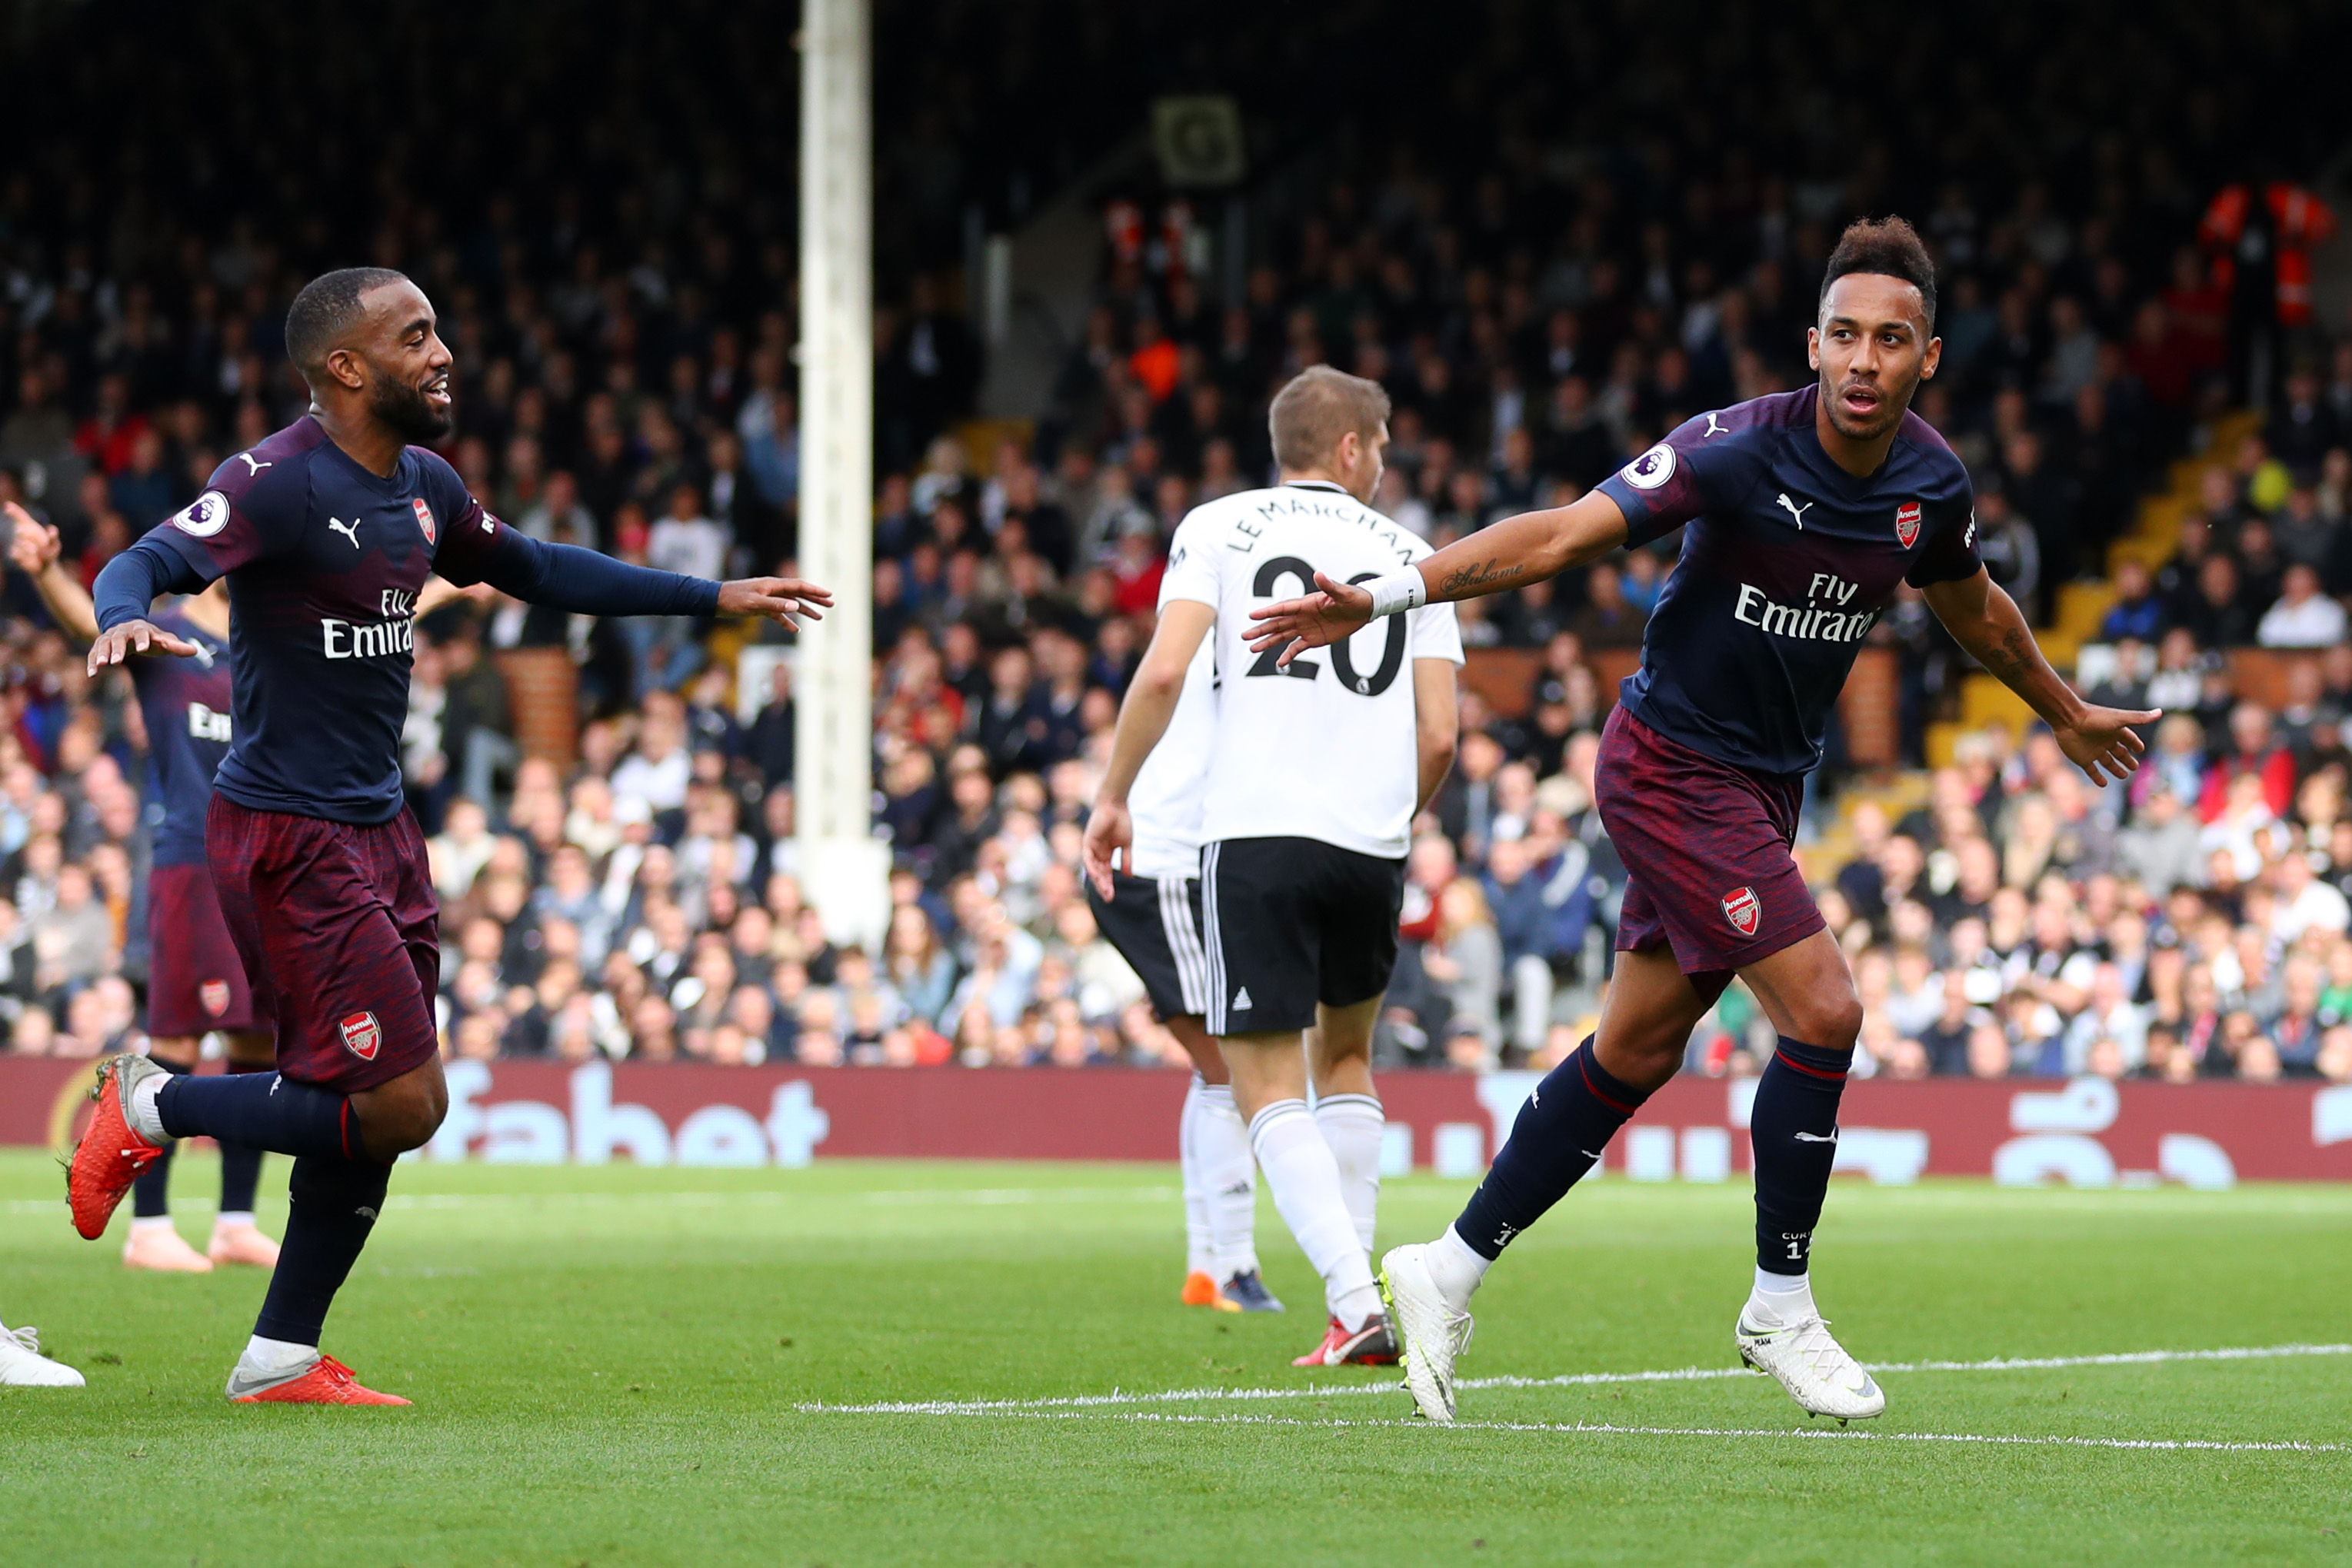 LONDON, ENGLAND - OCTOBER 07:  Pierre-Emerick Aubameyang of Arsenal celebrates with teammate Alexandre Lacazette after scoring his team's fourth goal during the Premier League match between Fulham FC and Arsenal FC at Craven Cottage on October 7, 2018 in London, United Kingdom.  (Photo by Catherine Ivill/Getty Images)